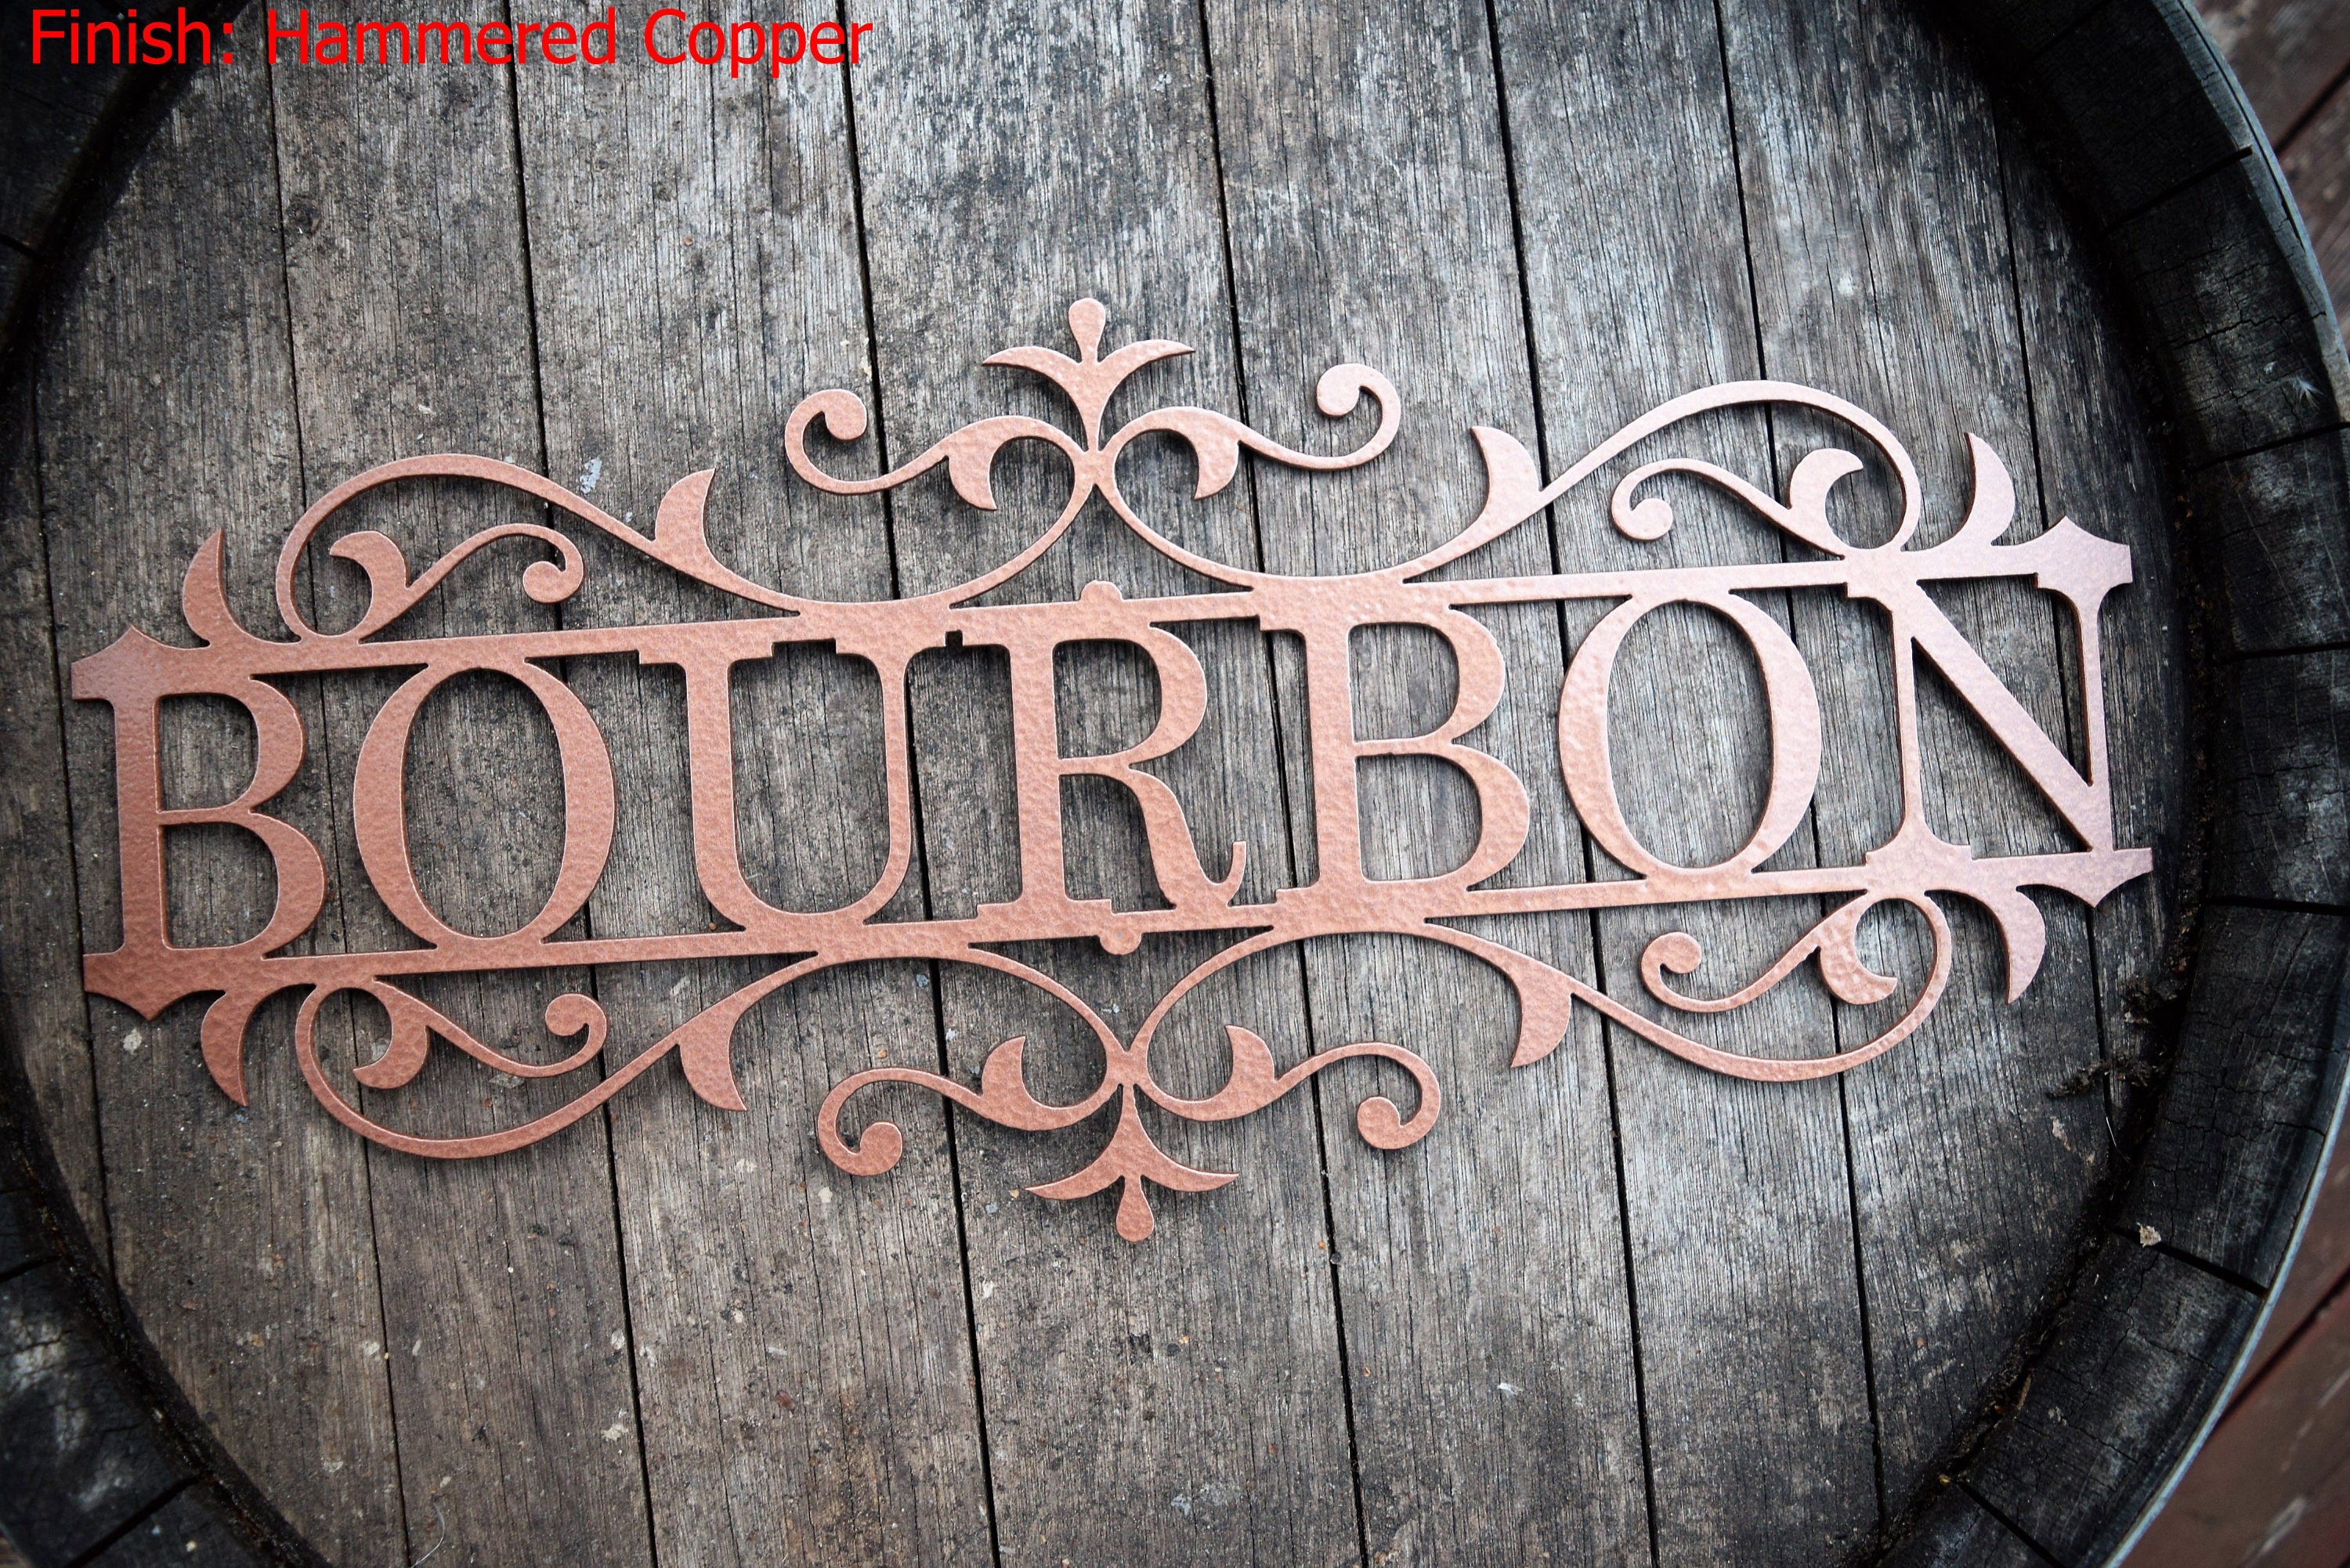 Personalized Flourished Metal Name Sign